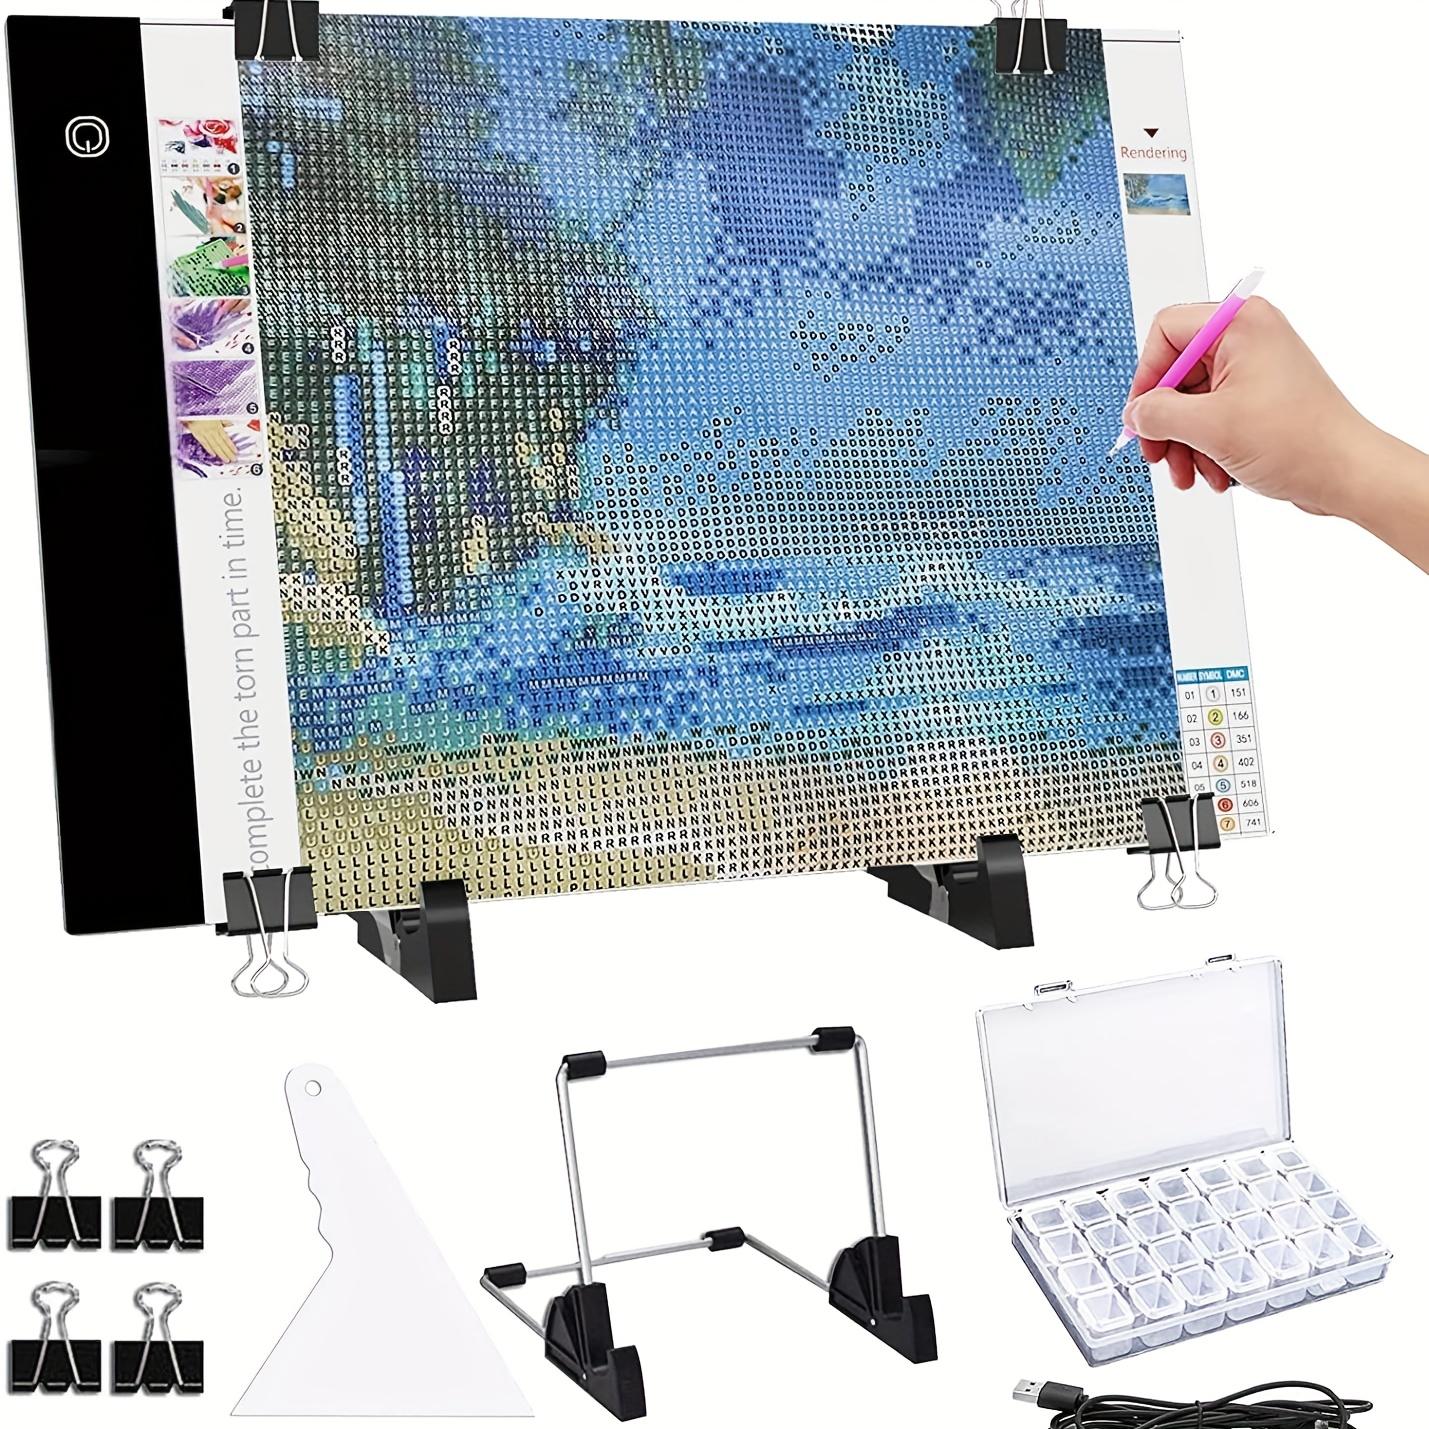 ARTDOT Diamond Painting Drawing board A3/A4/A5 Led Light Pad for